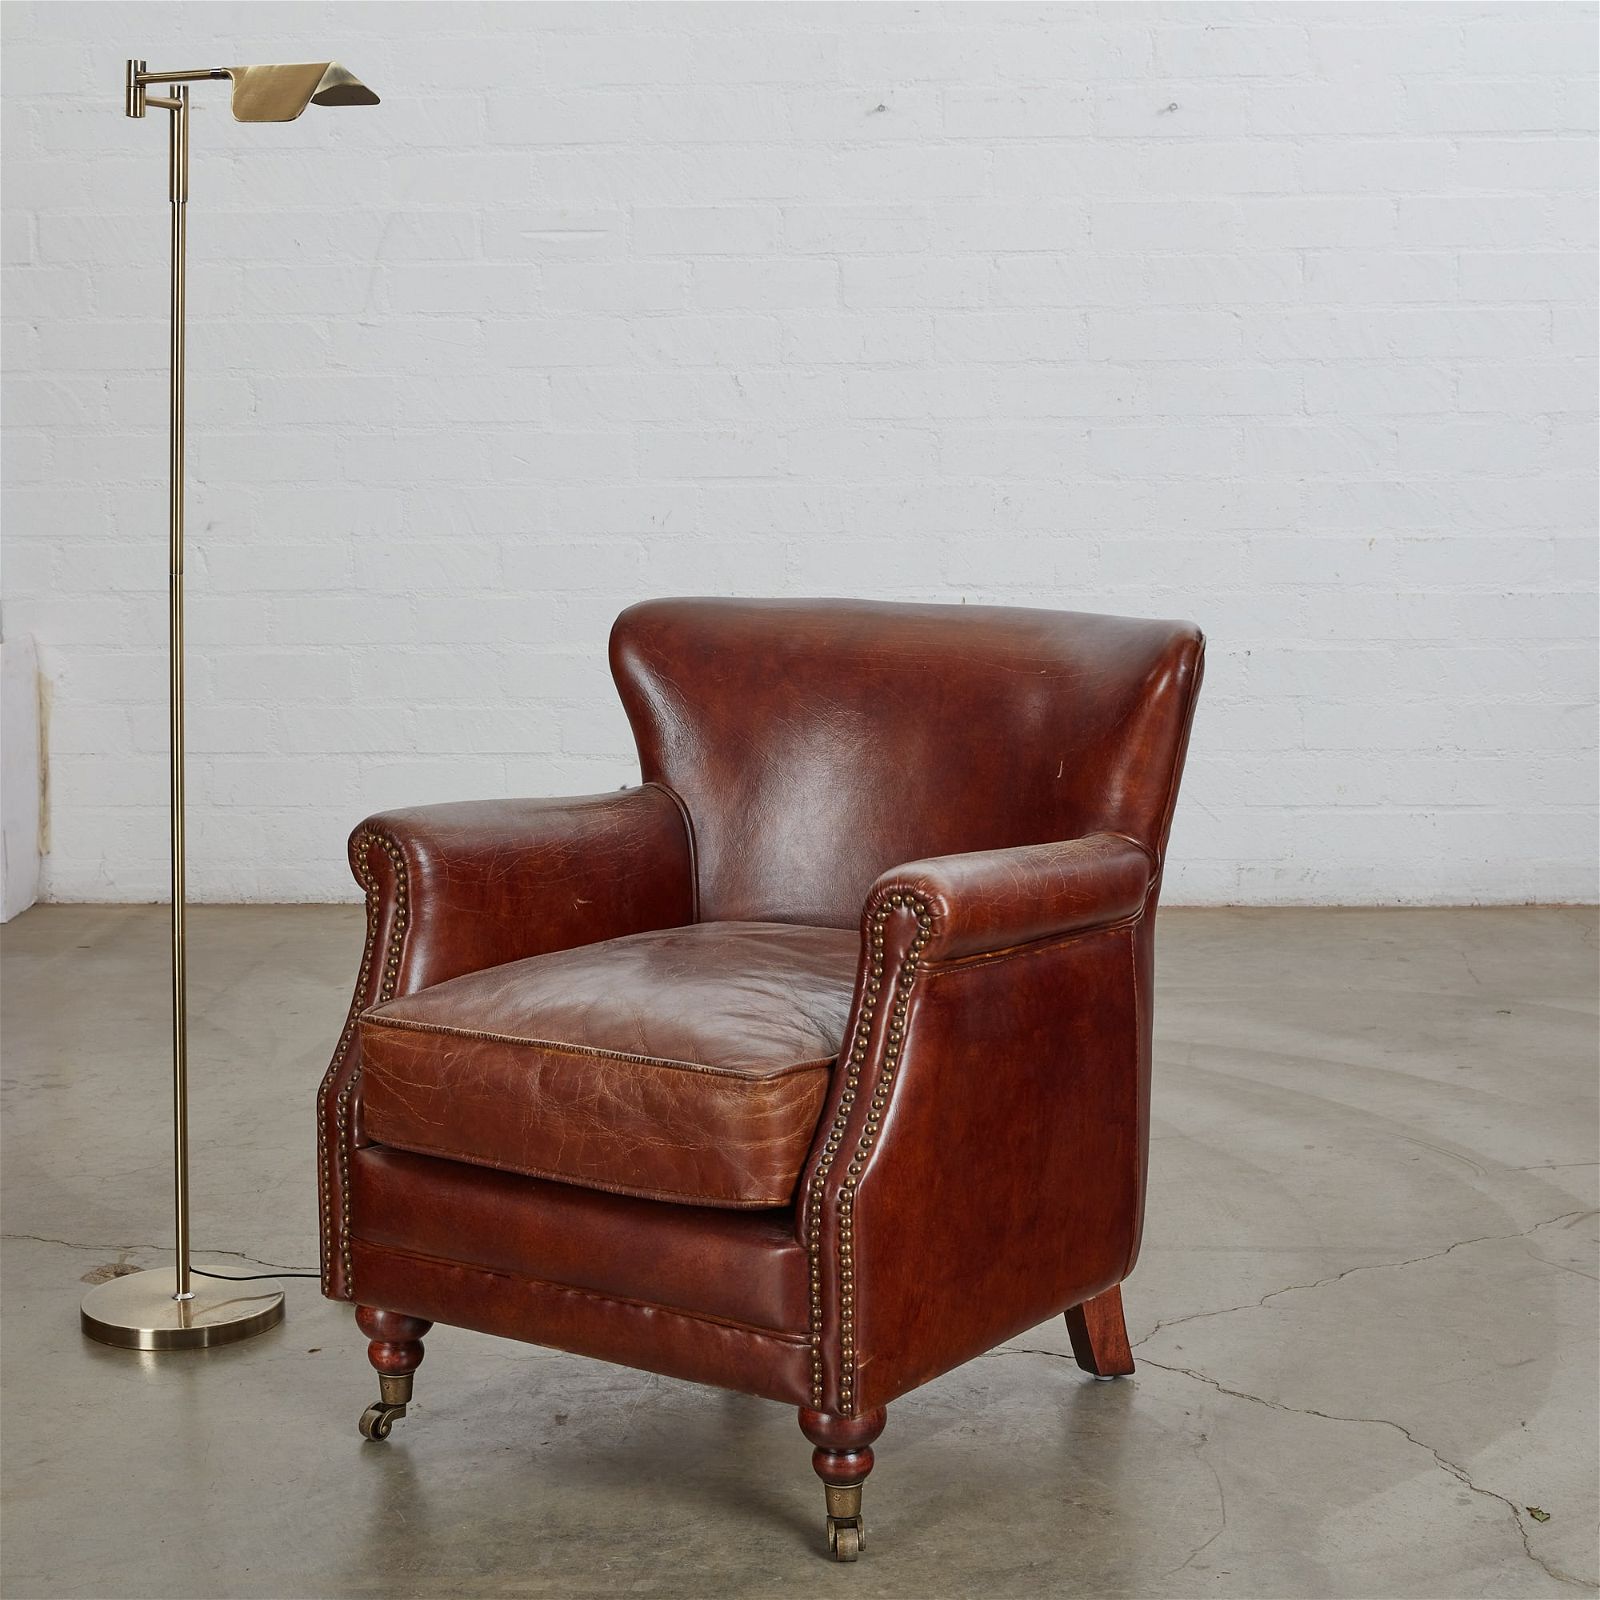 A BROWN LEATHER ARMCHAIR   2fb4357